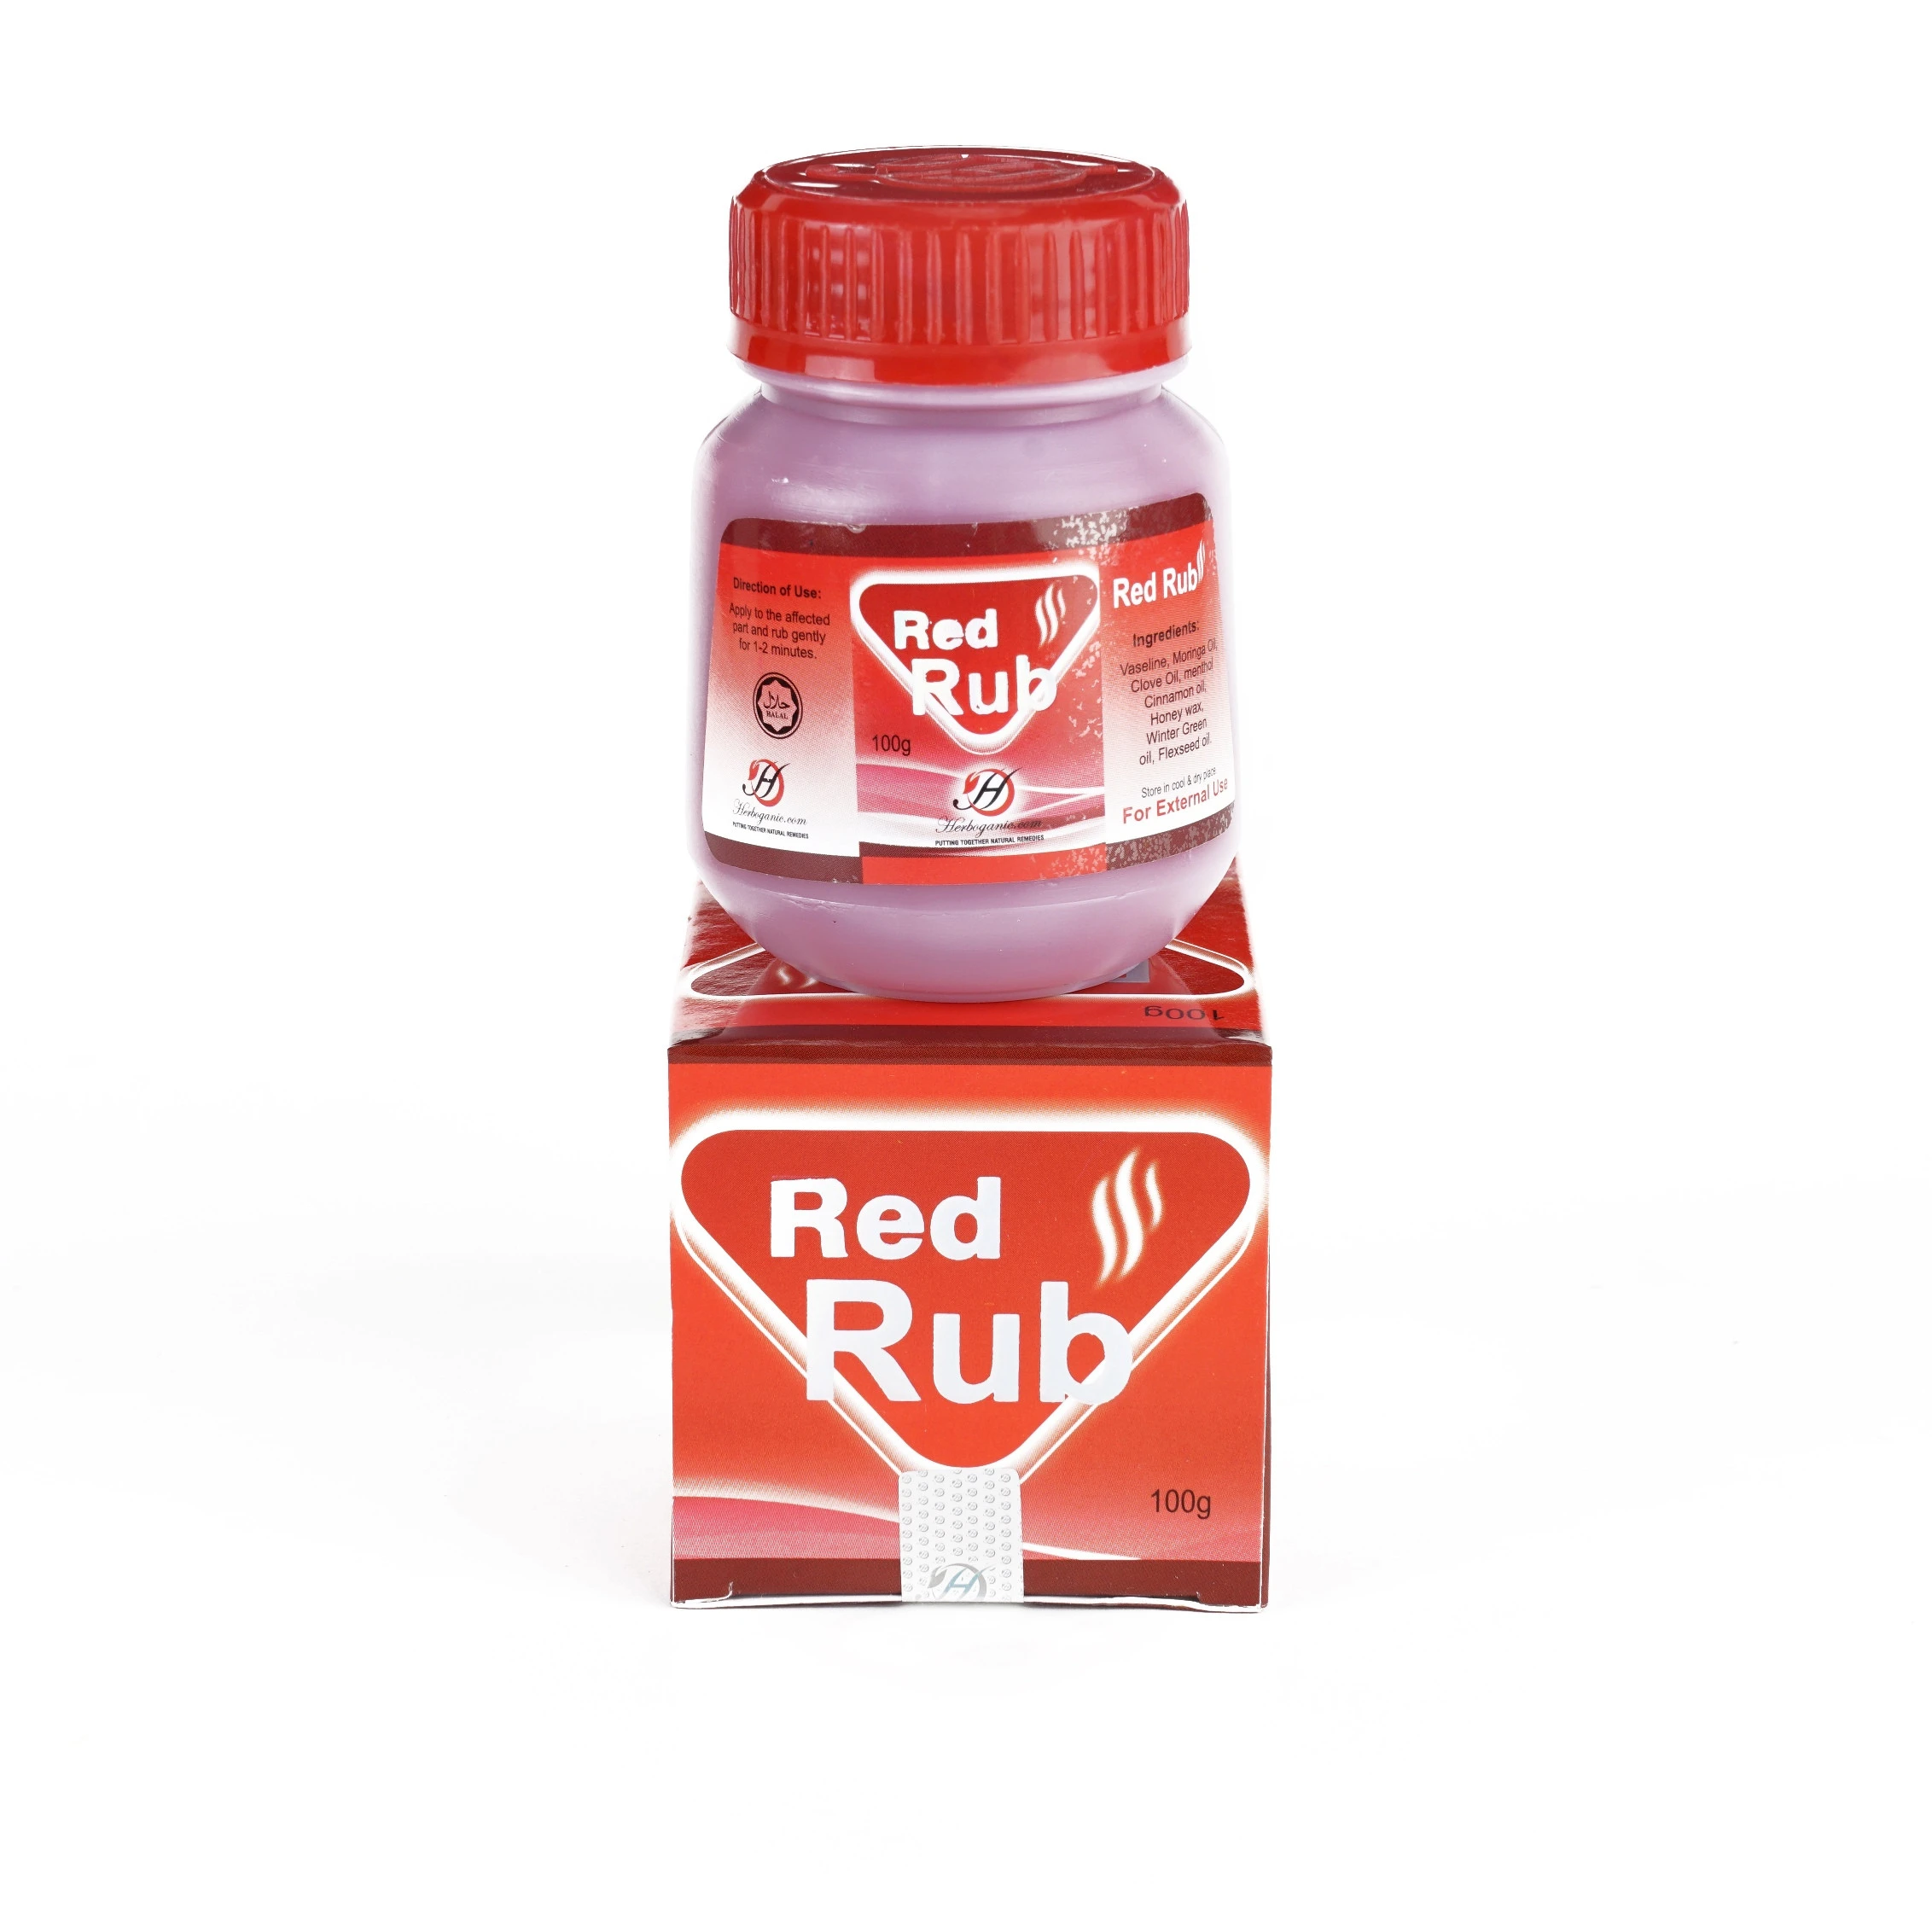 Red Rub (Pain Relief Ointment)